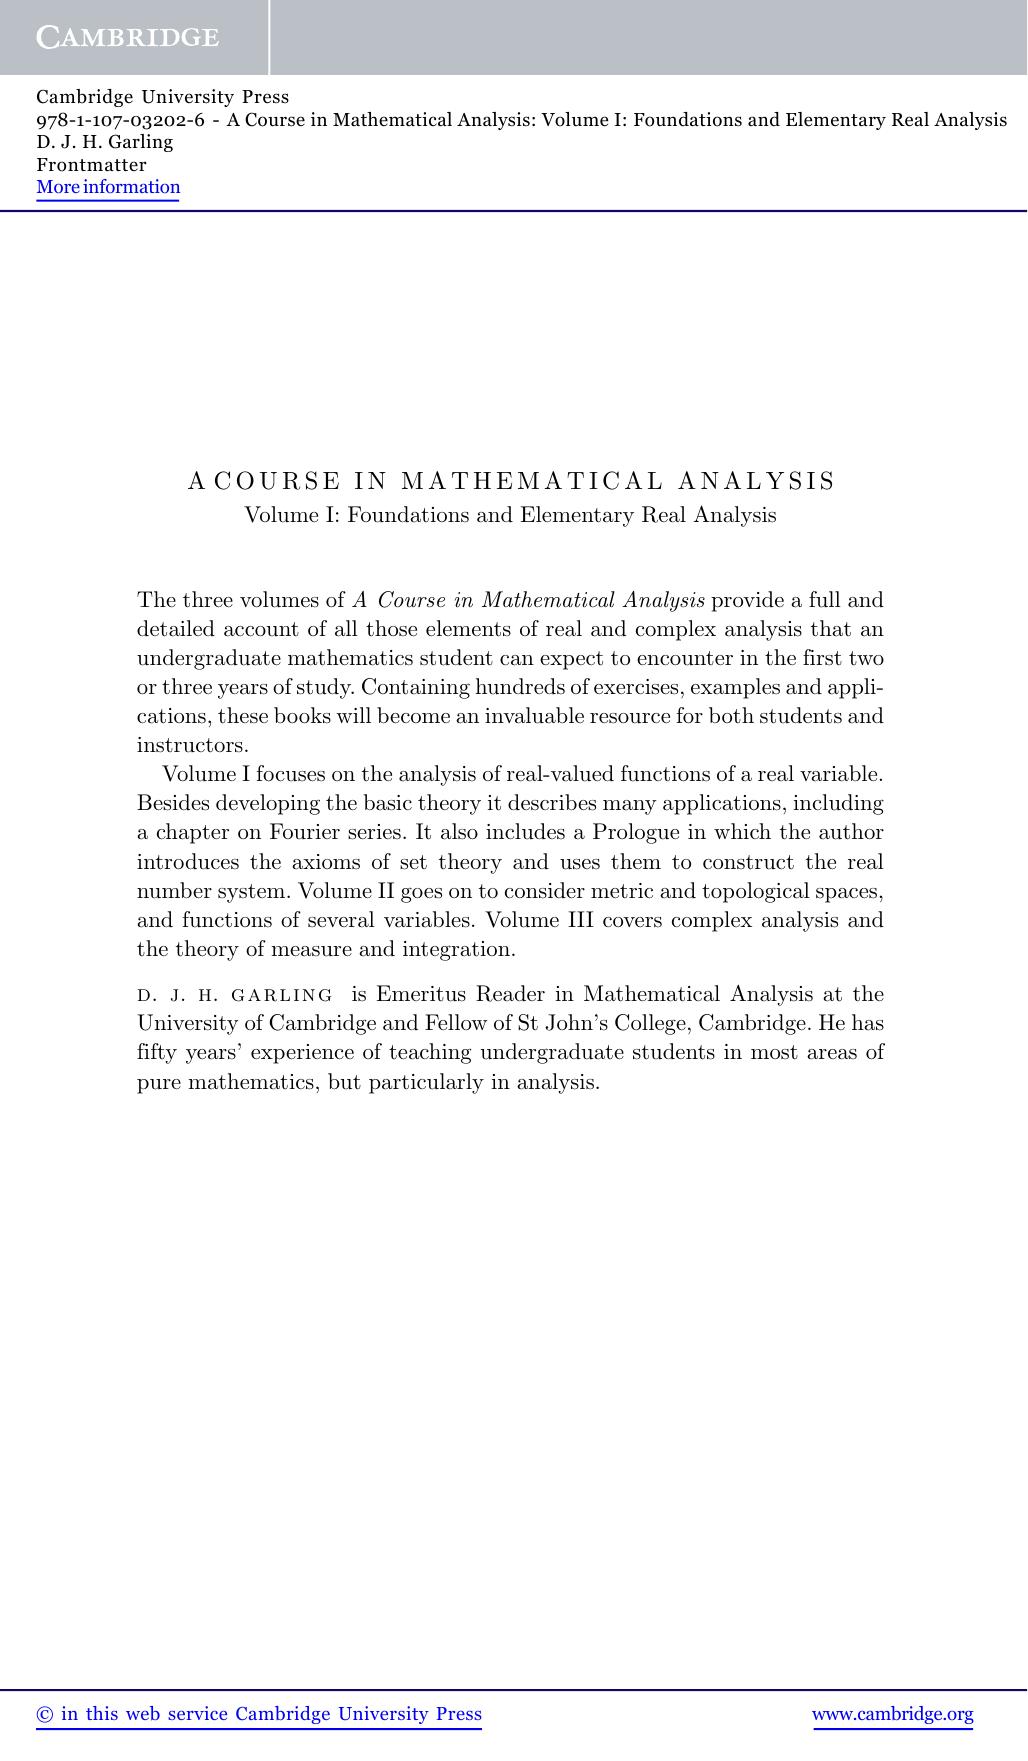 A Course in Mathematical Analysis - Volume I: Foundations and Elementary Real Analysis (Frontmatter)